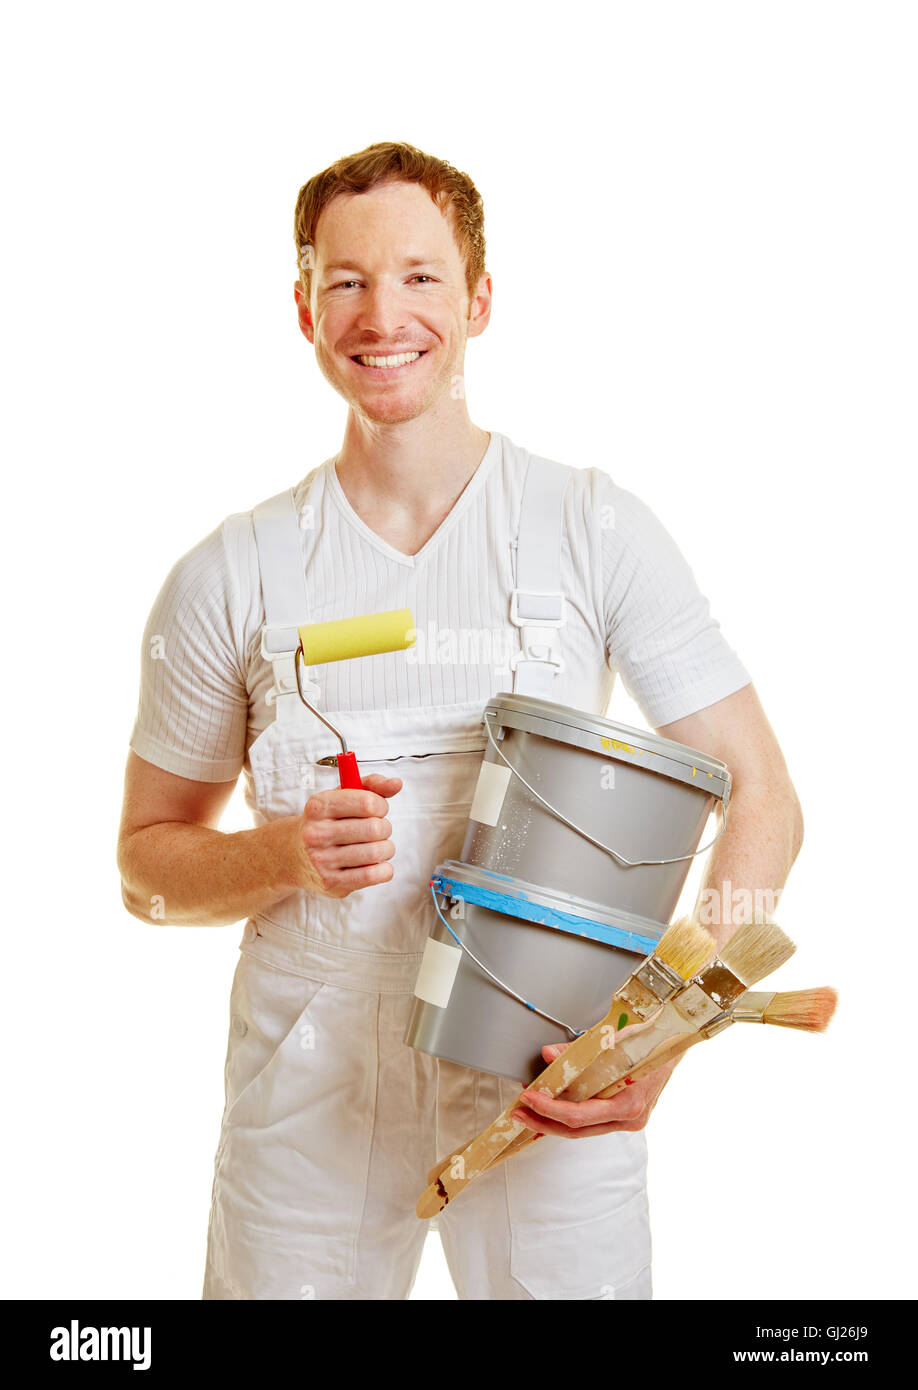 Painter or craftsman on a white background as a profession Stock Photo